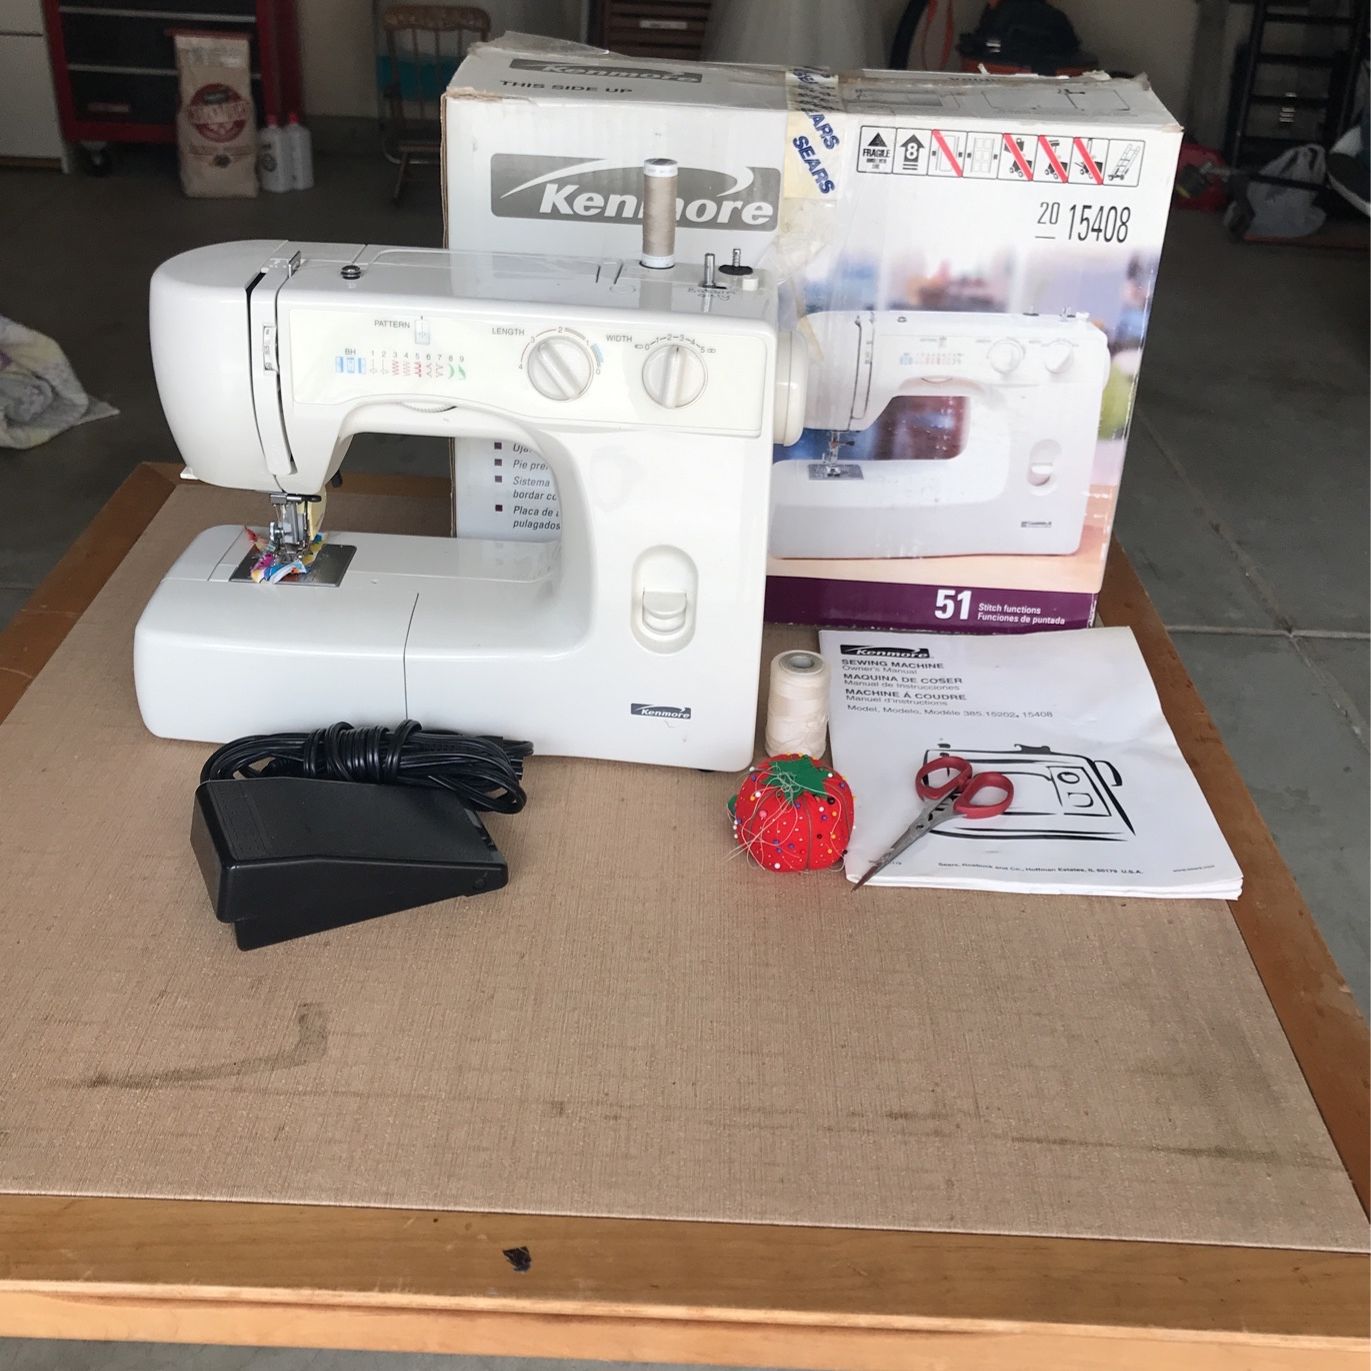 Kenmore Sewing Machine With 51 Stitch Functions 20-15408